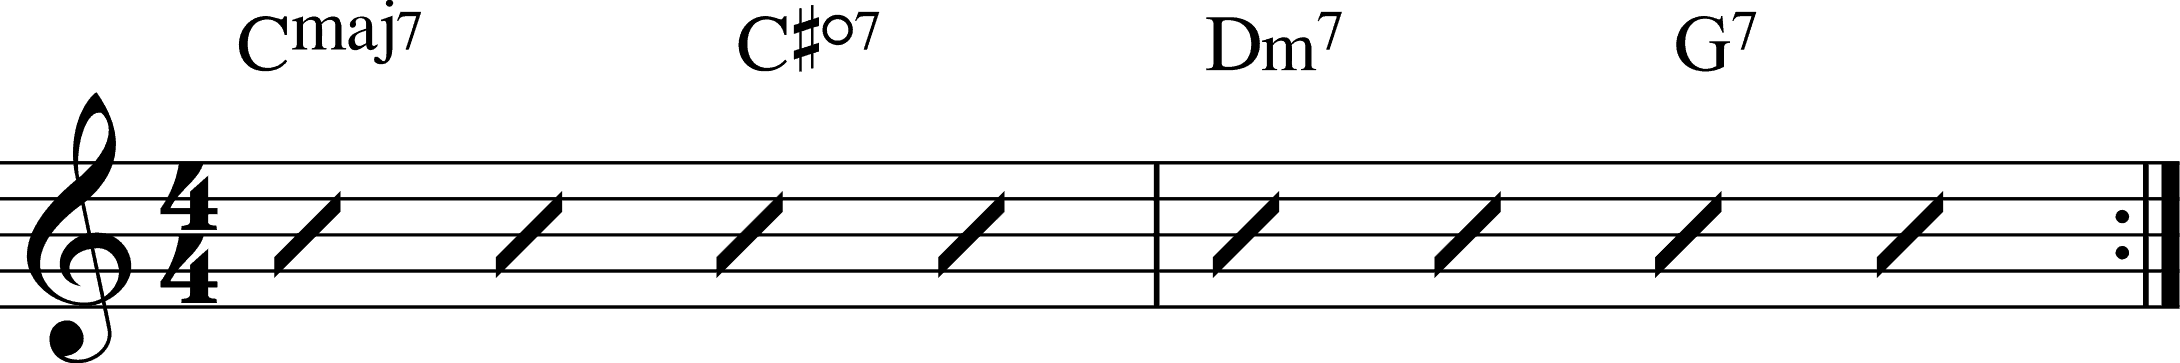 Diminished Chord Example-Passing-Standard progression